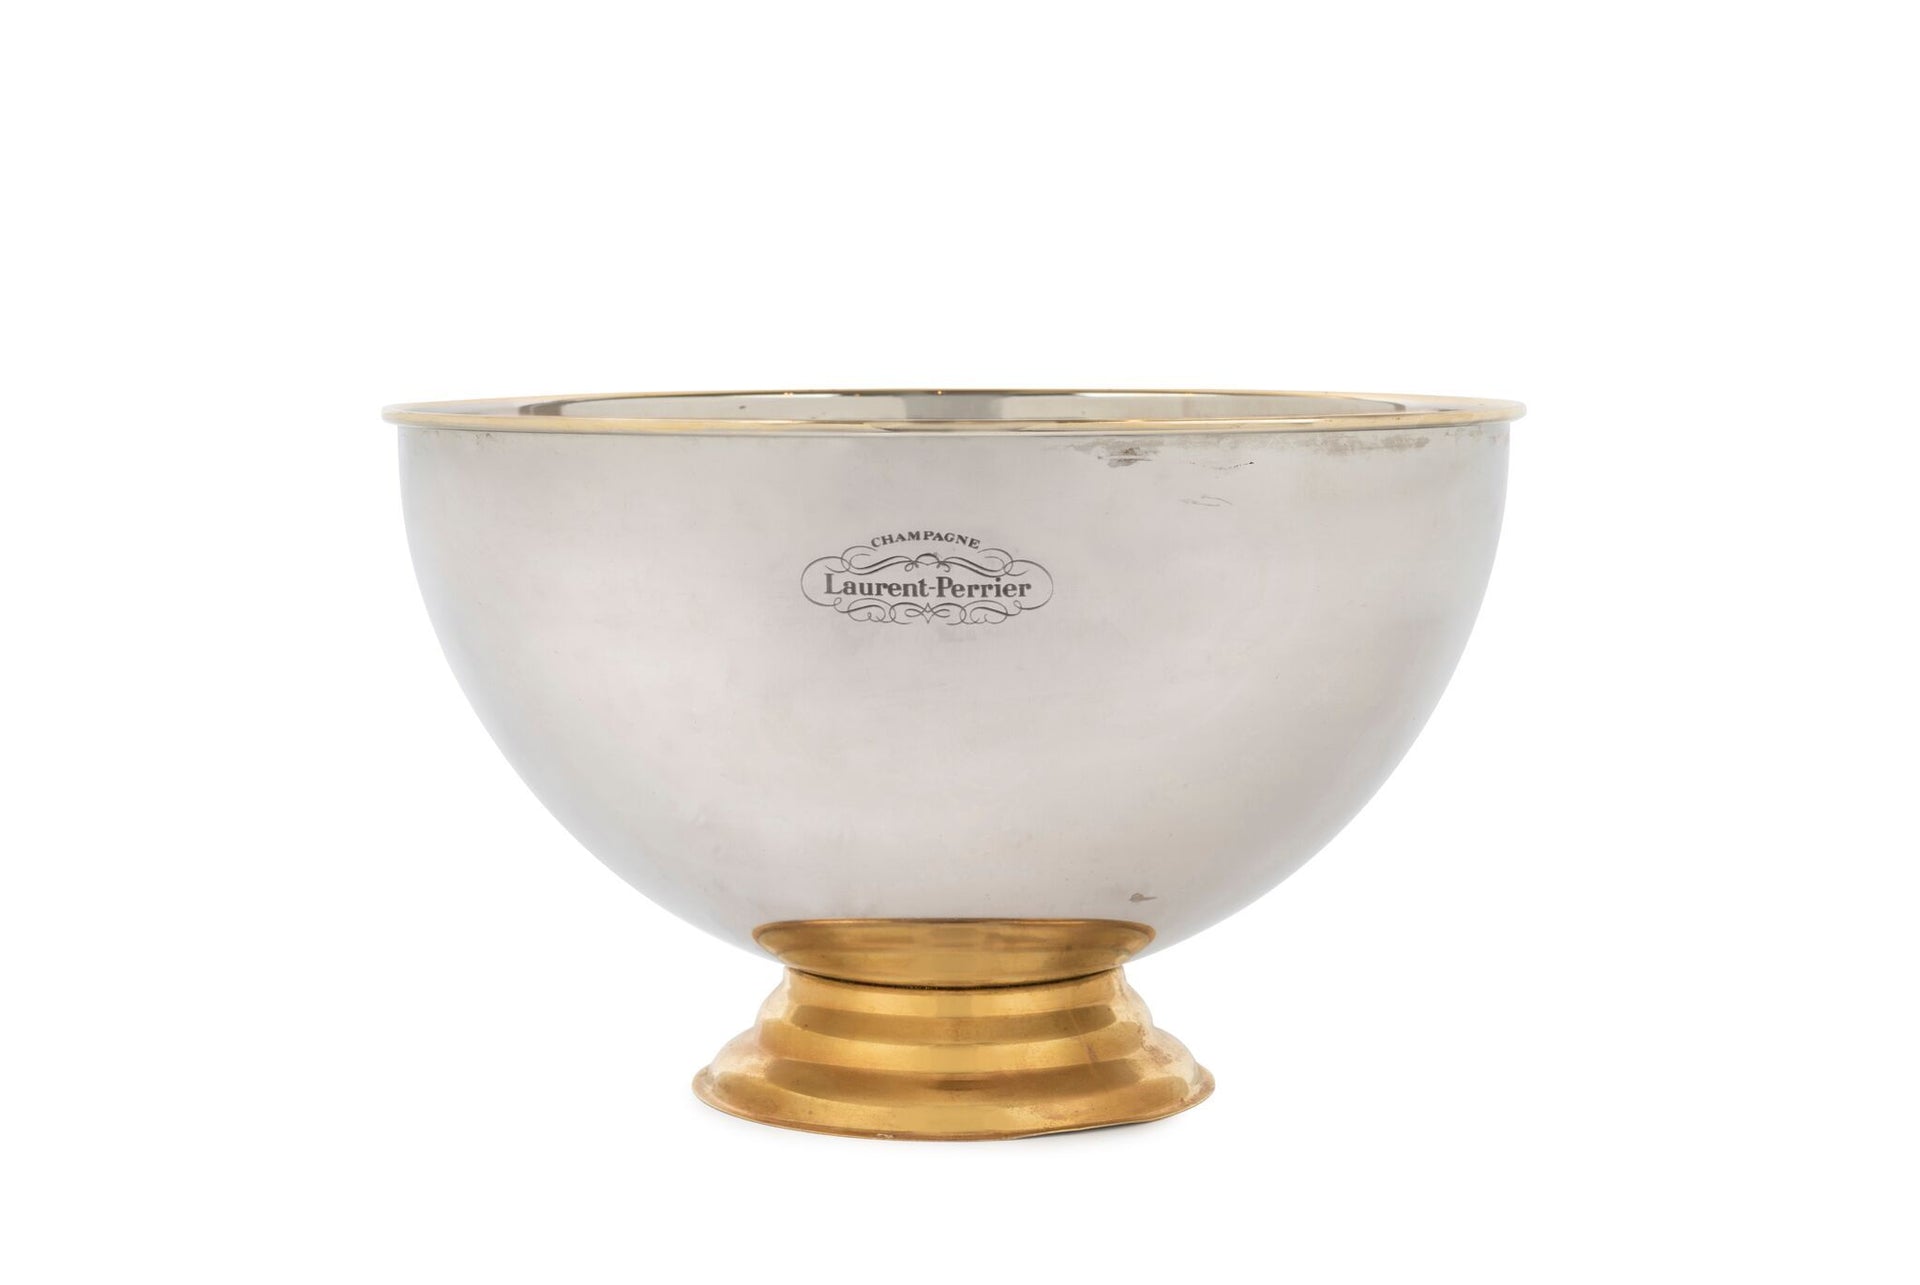 SOLD A large and stylish gilt metal pedestal Champagne cooler labelled Laurent Perrier, French Circa 1950  25cm high, 41cm diameter